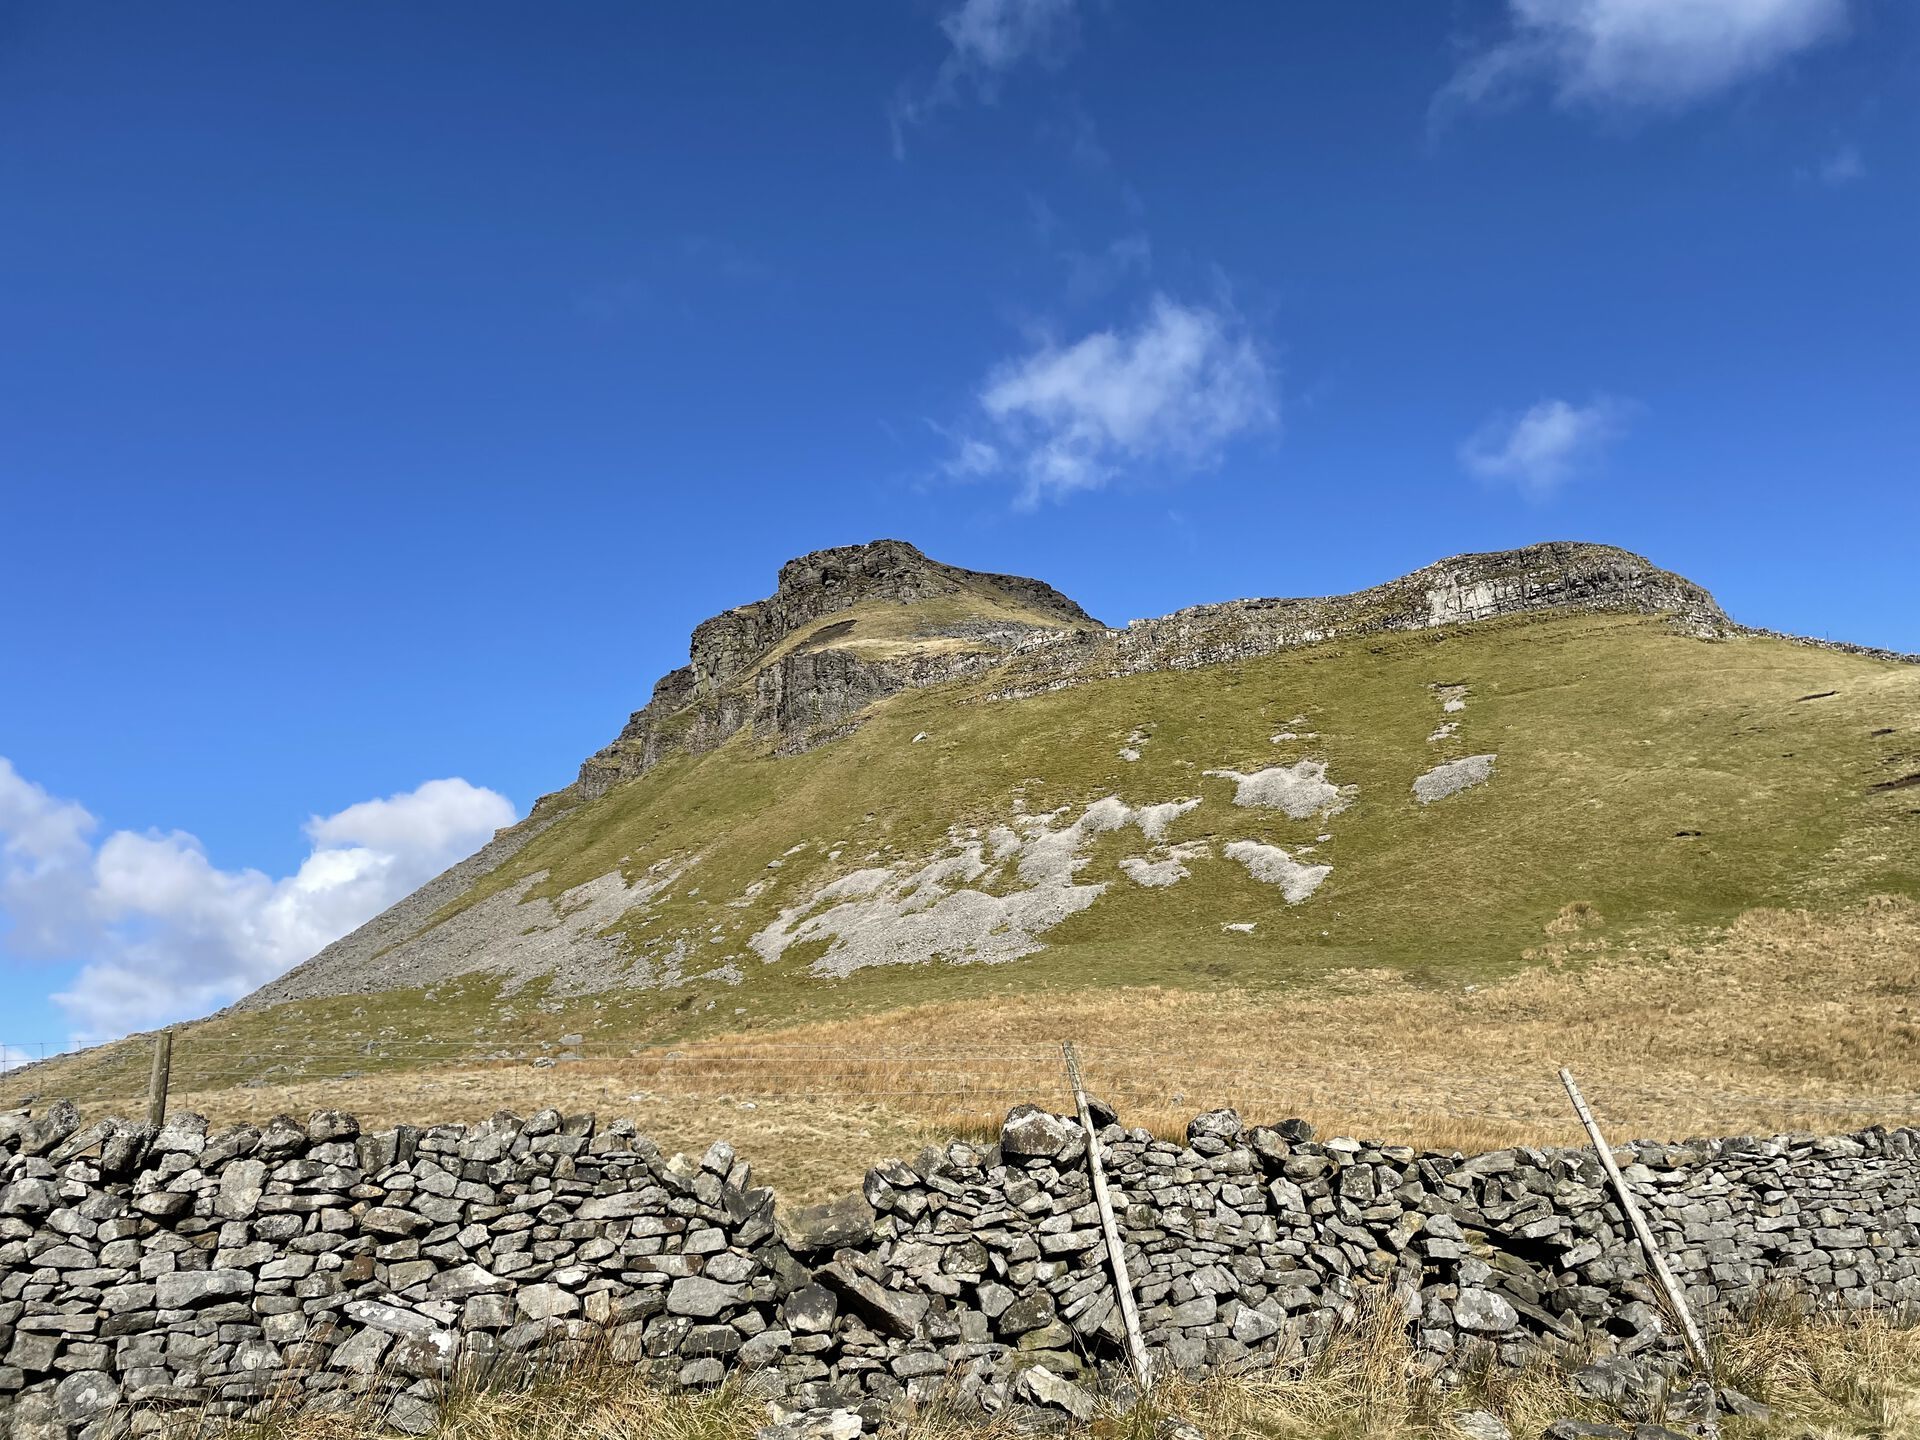 The view back up to Pen-y-ghent from the descent to Brackenbottom